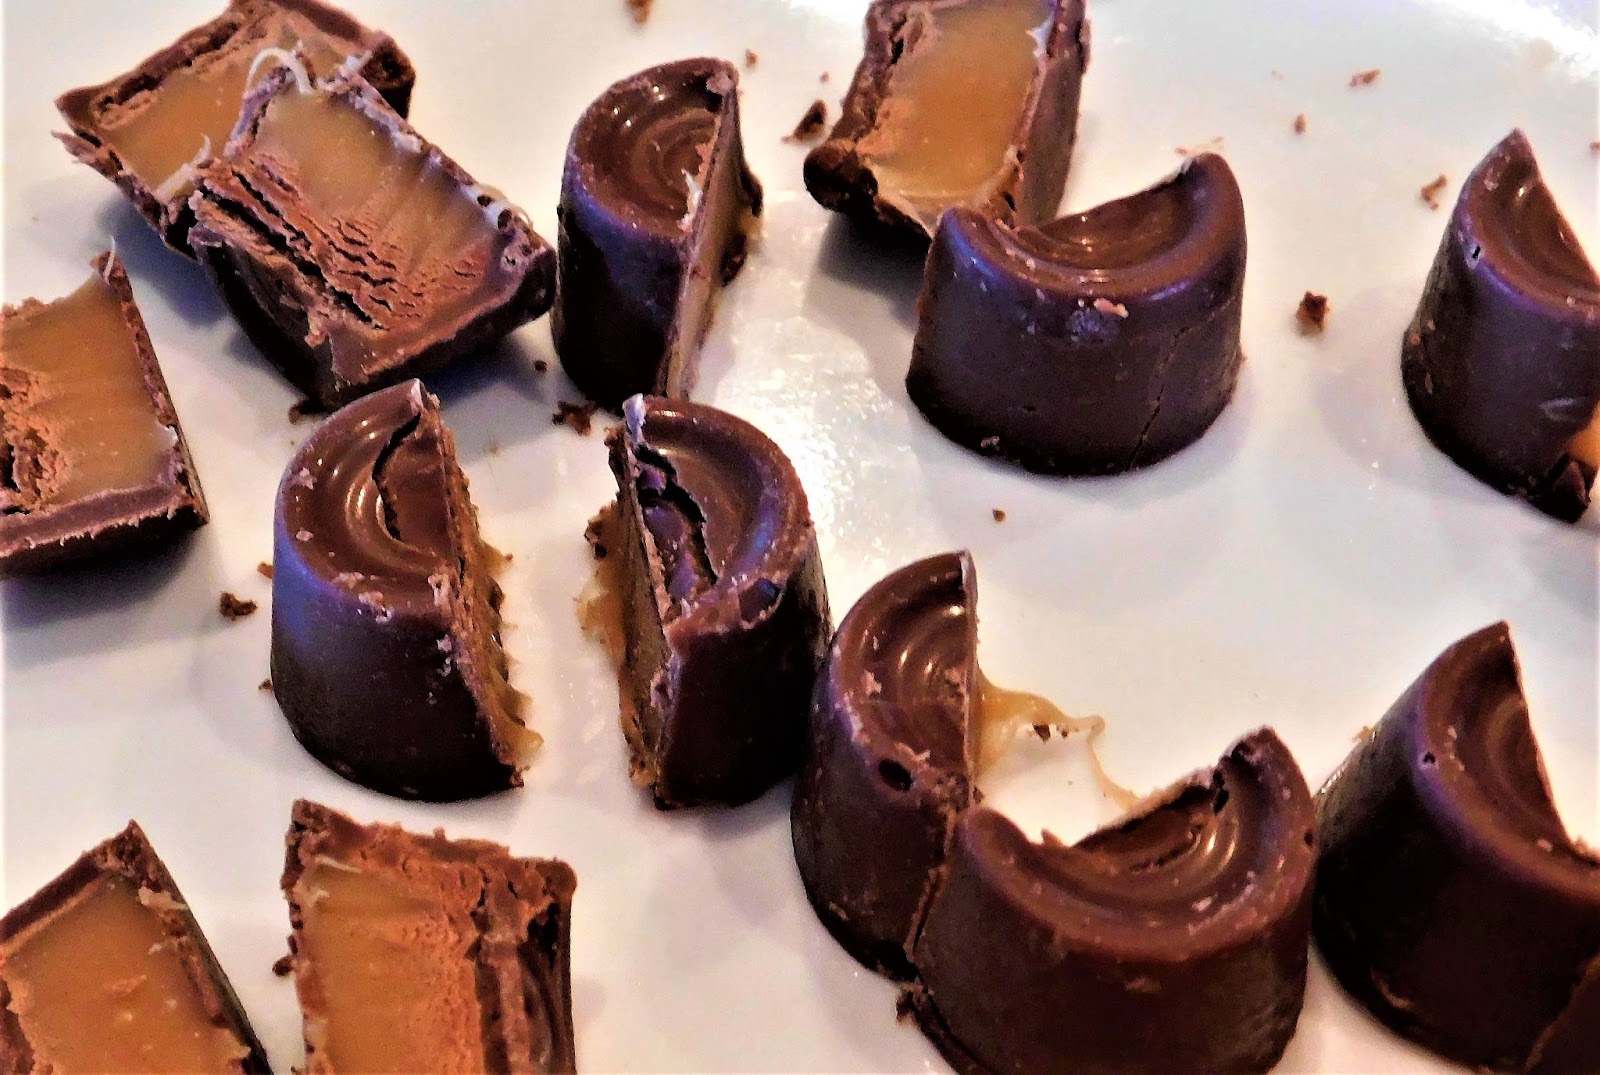 Chocolate caramel candies broken in half to reveal the gooey, rich caramel filling inside, showcasing their luscious texture and inviting sweetness.